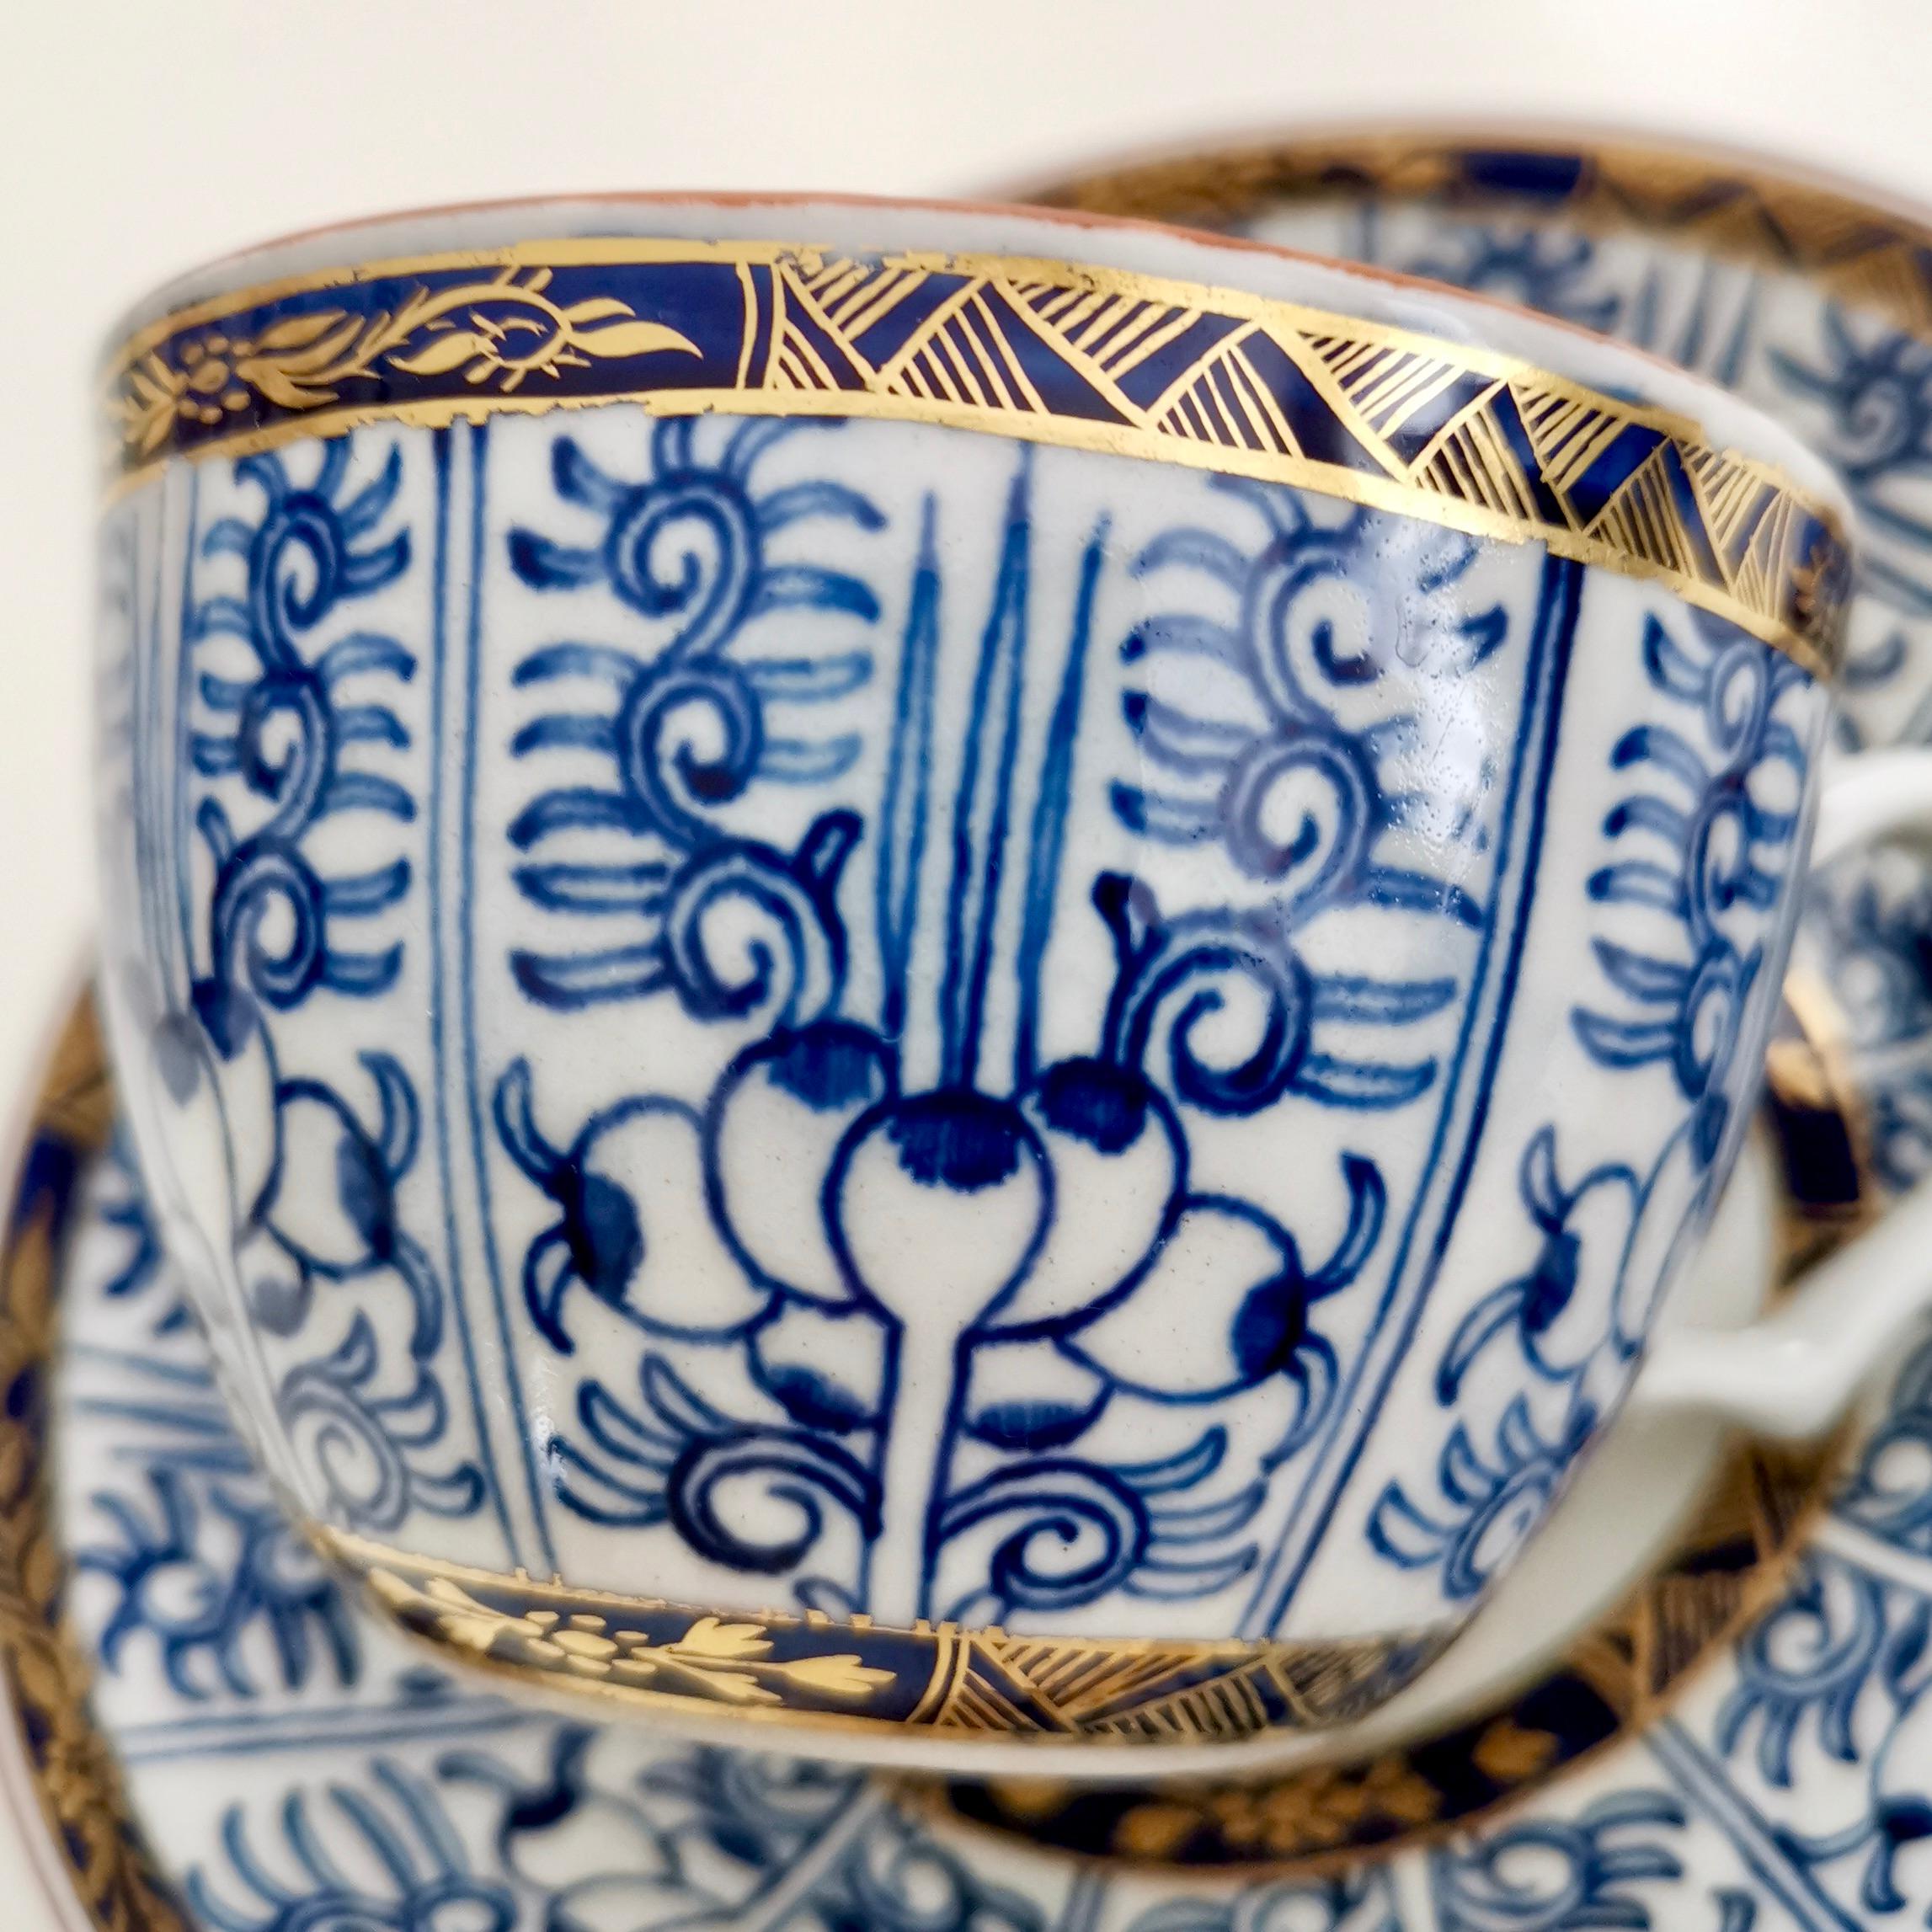 English Chamberlain Worcester Porcelain Teacup, Blue Lily Pattern, circa 1815